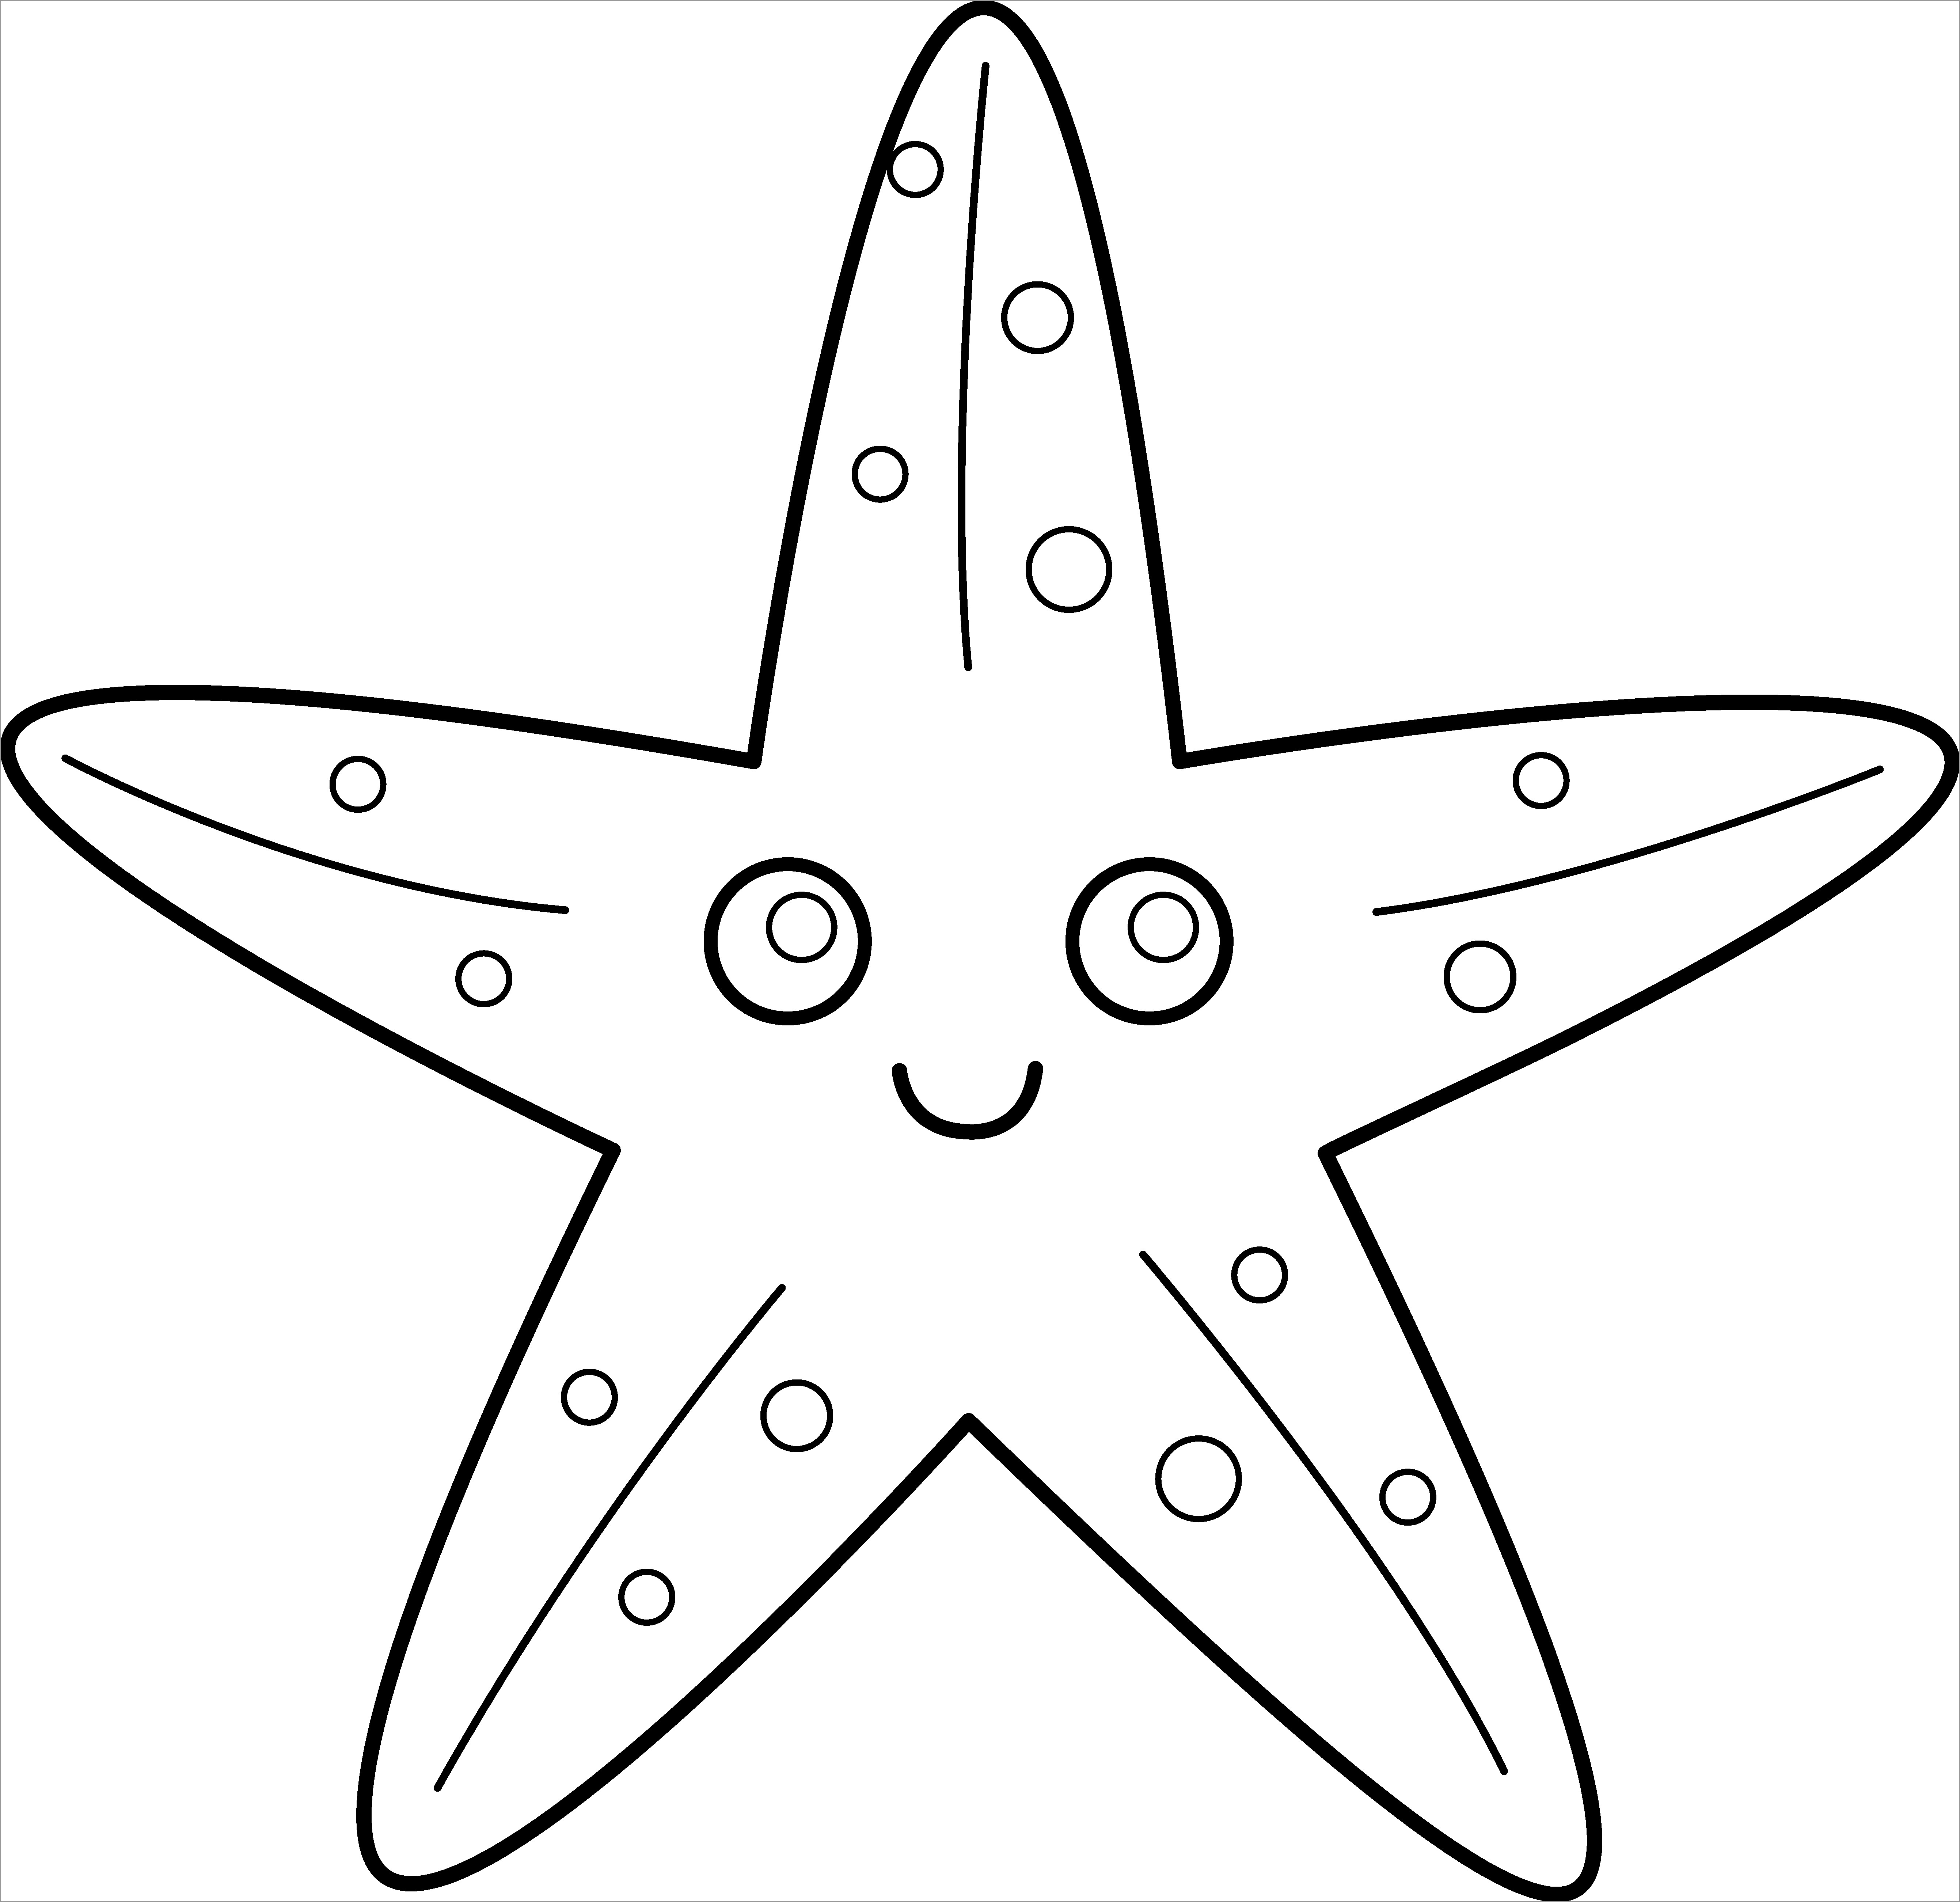 Starfish Coloring Page for Kids